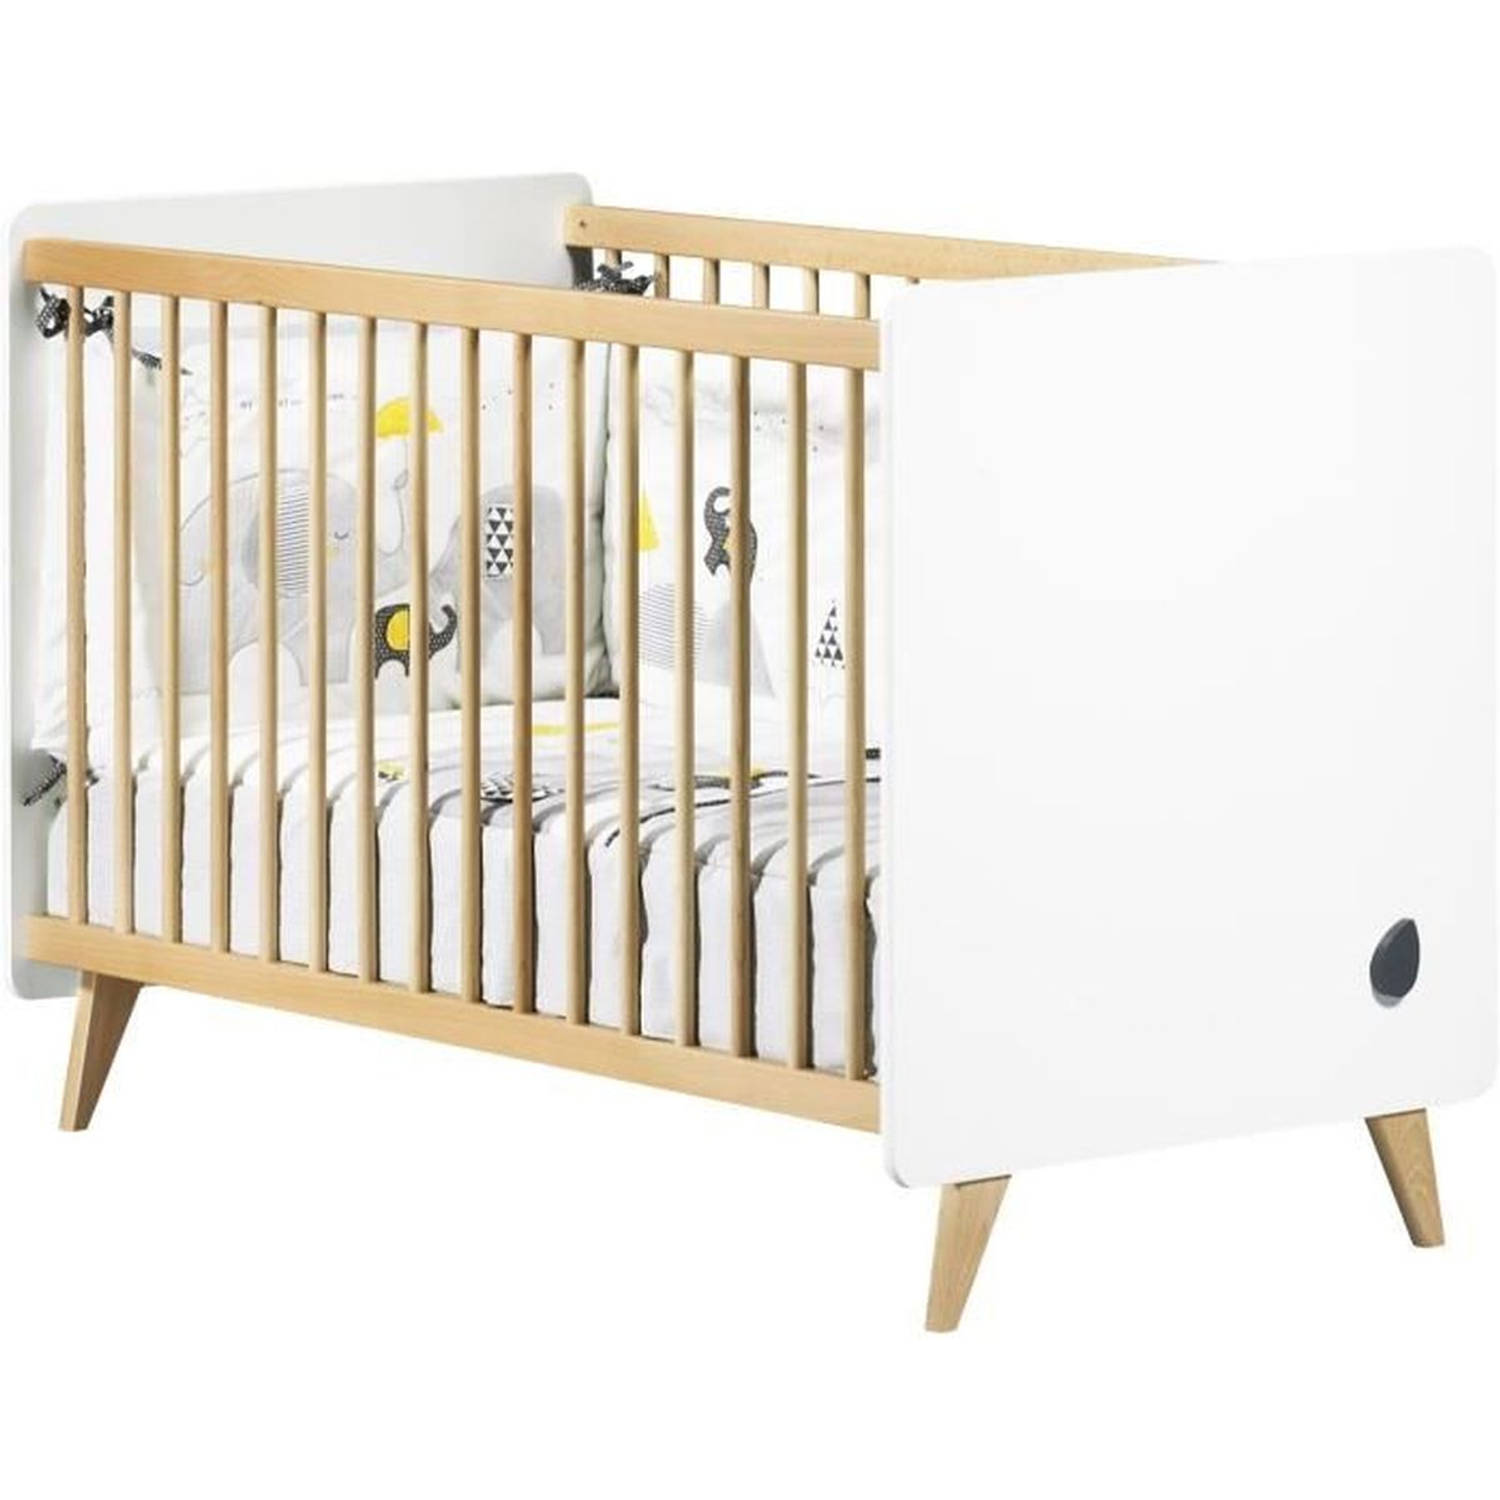 OSLO duo babykamer - bed 120x60 + commode met 2 lades - SAUTHON